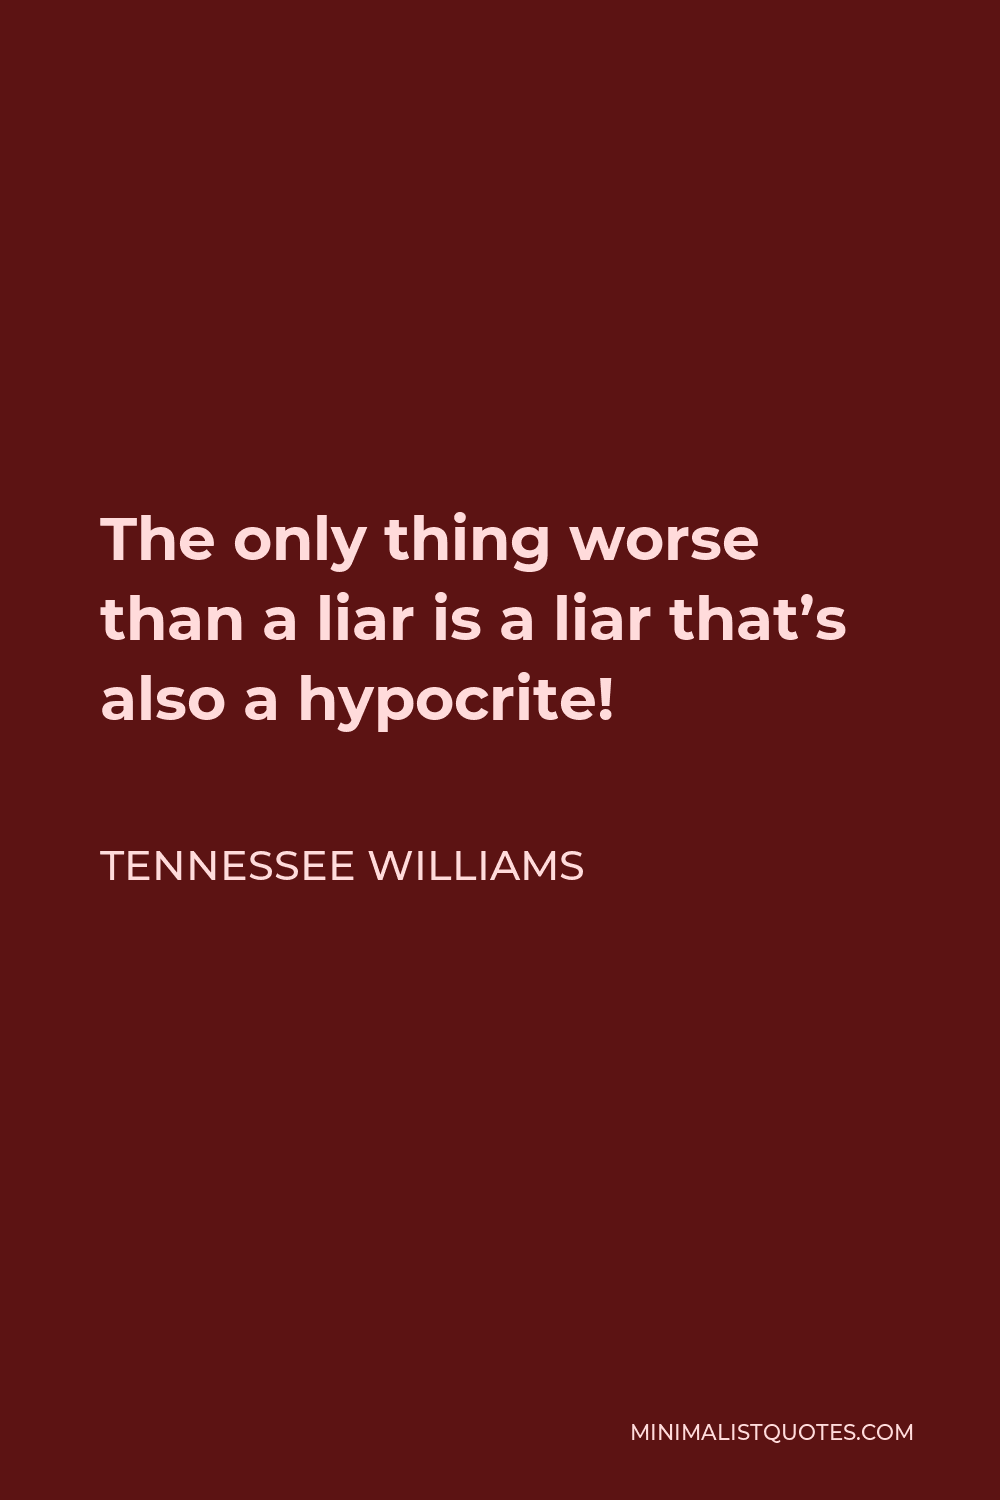 Tennessee Williams Quote - The only thing worse than a liar is a liar that’s also a hypocrite!